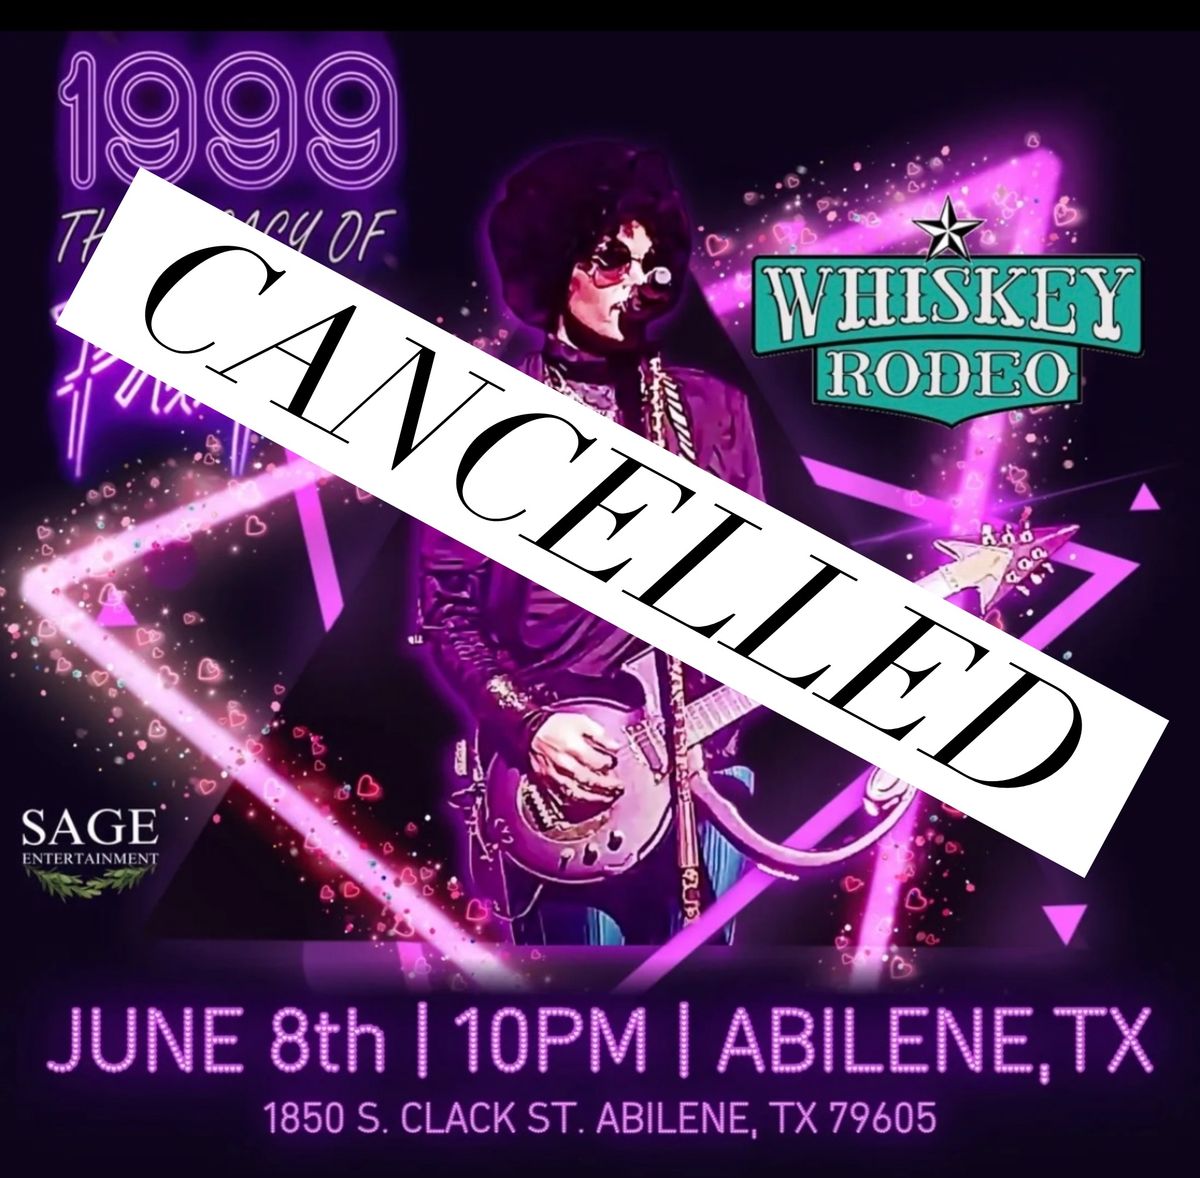 CANCELLED - Legacy of Prince @ Whiskey Rodeo